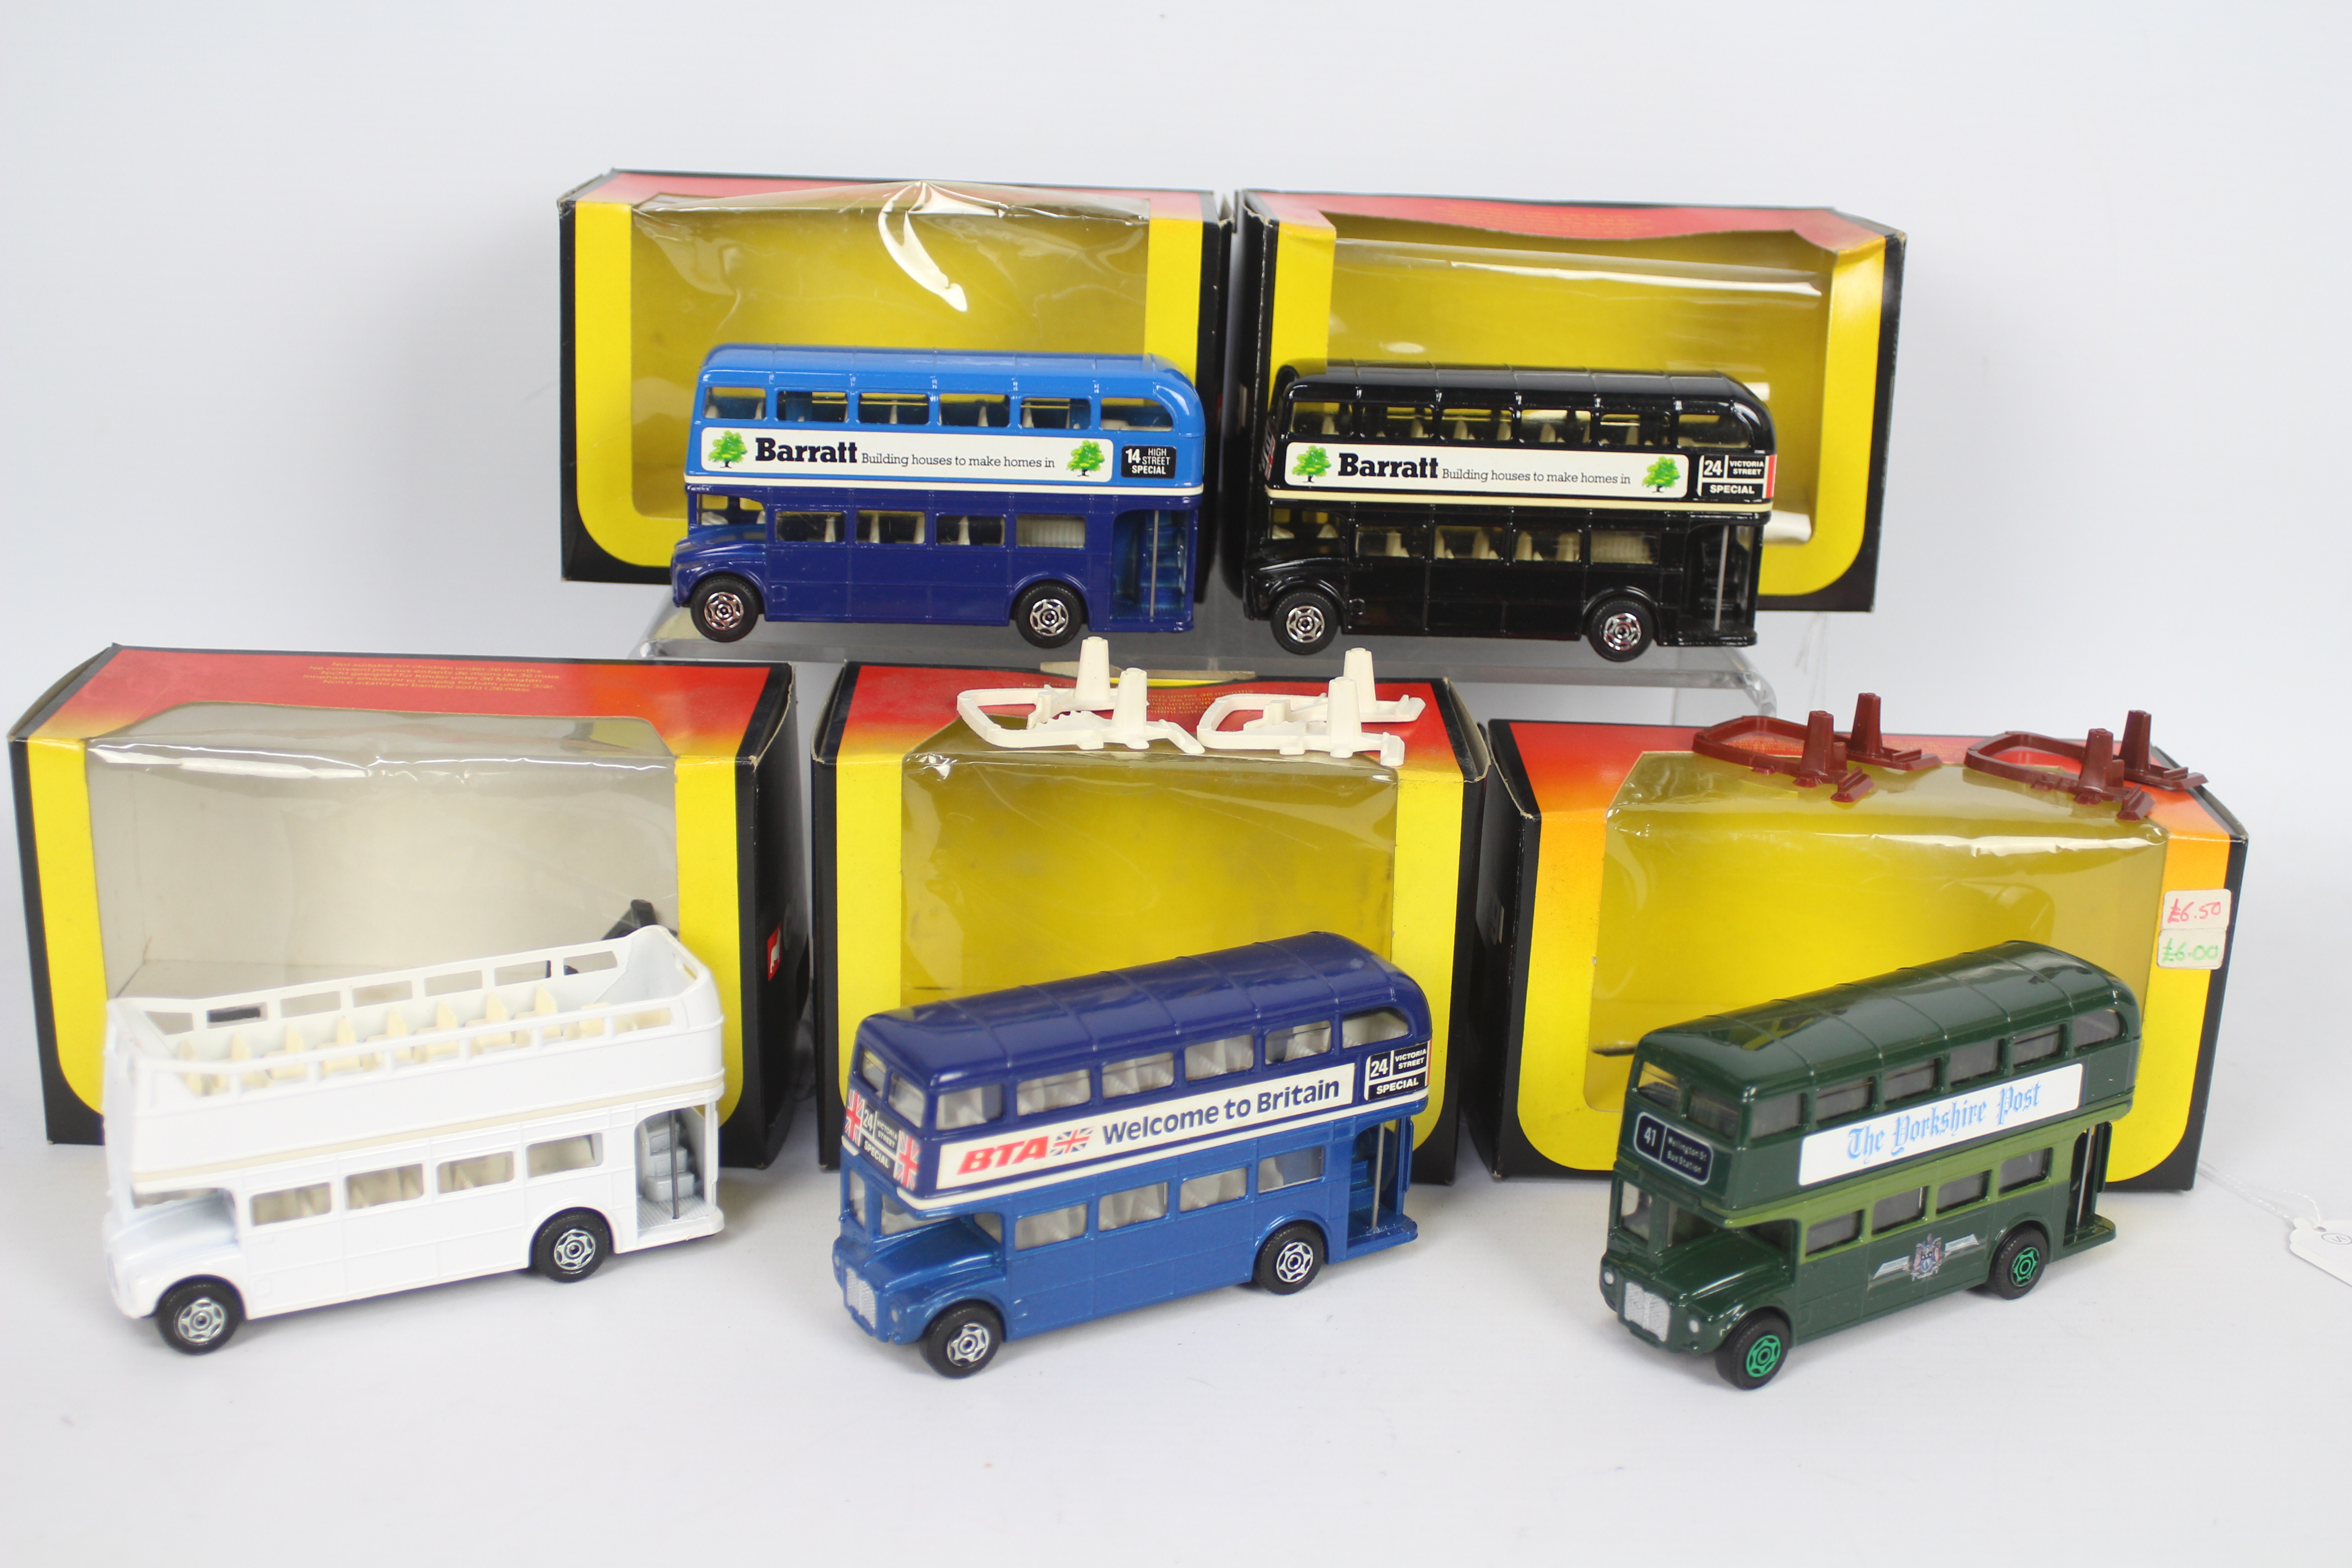 Corgi - 5 x boxed # 469 Routemaster bus models, several of which are unusual.